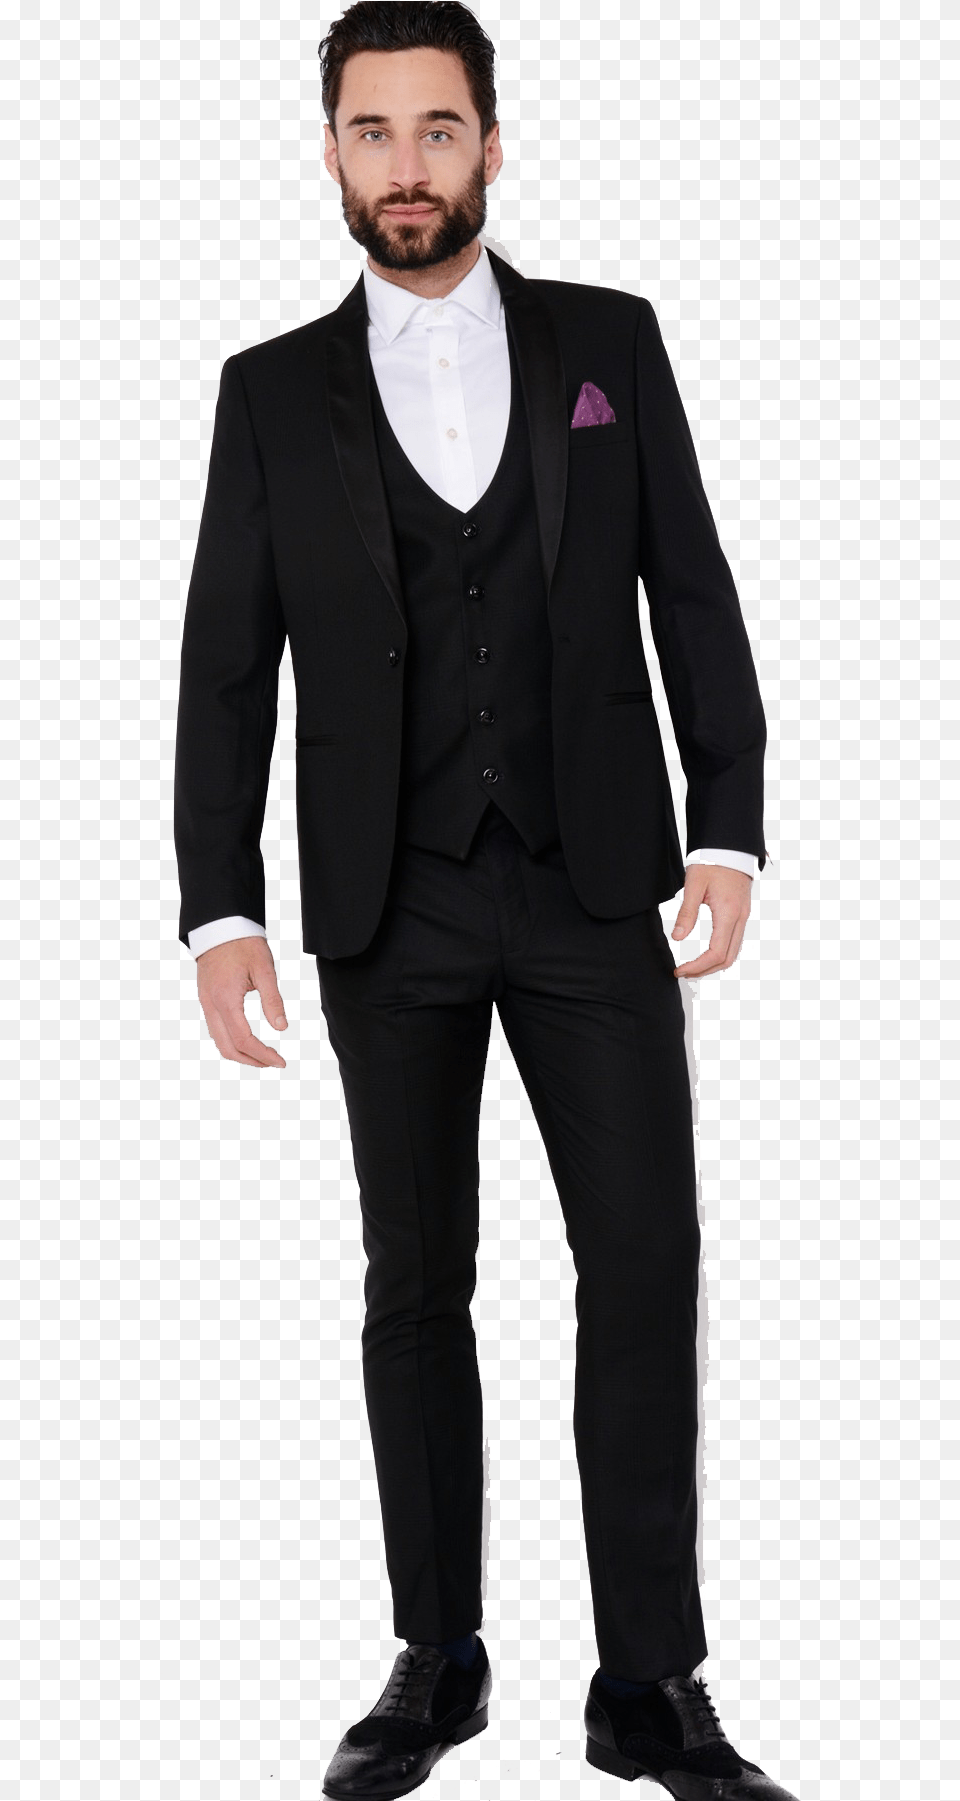 Black Tuxedo Pics Suit, Clothing, Formal Wear, Adult, Male Free Transparent Png